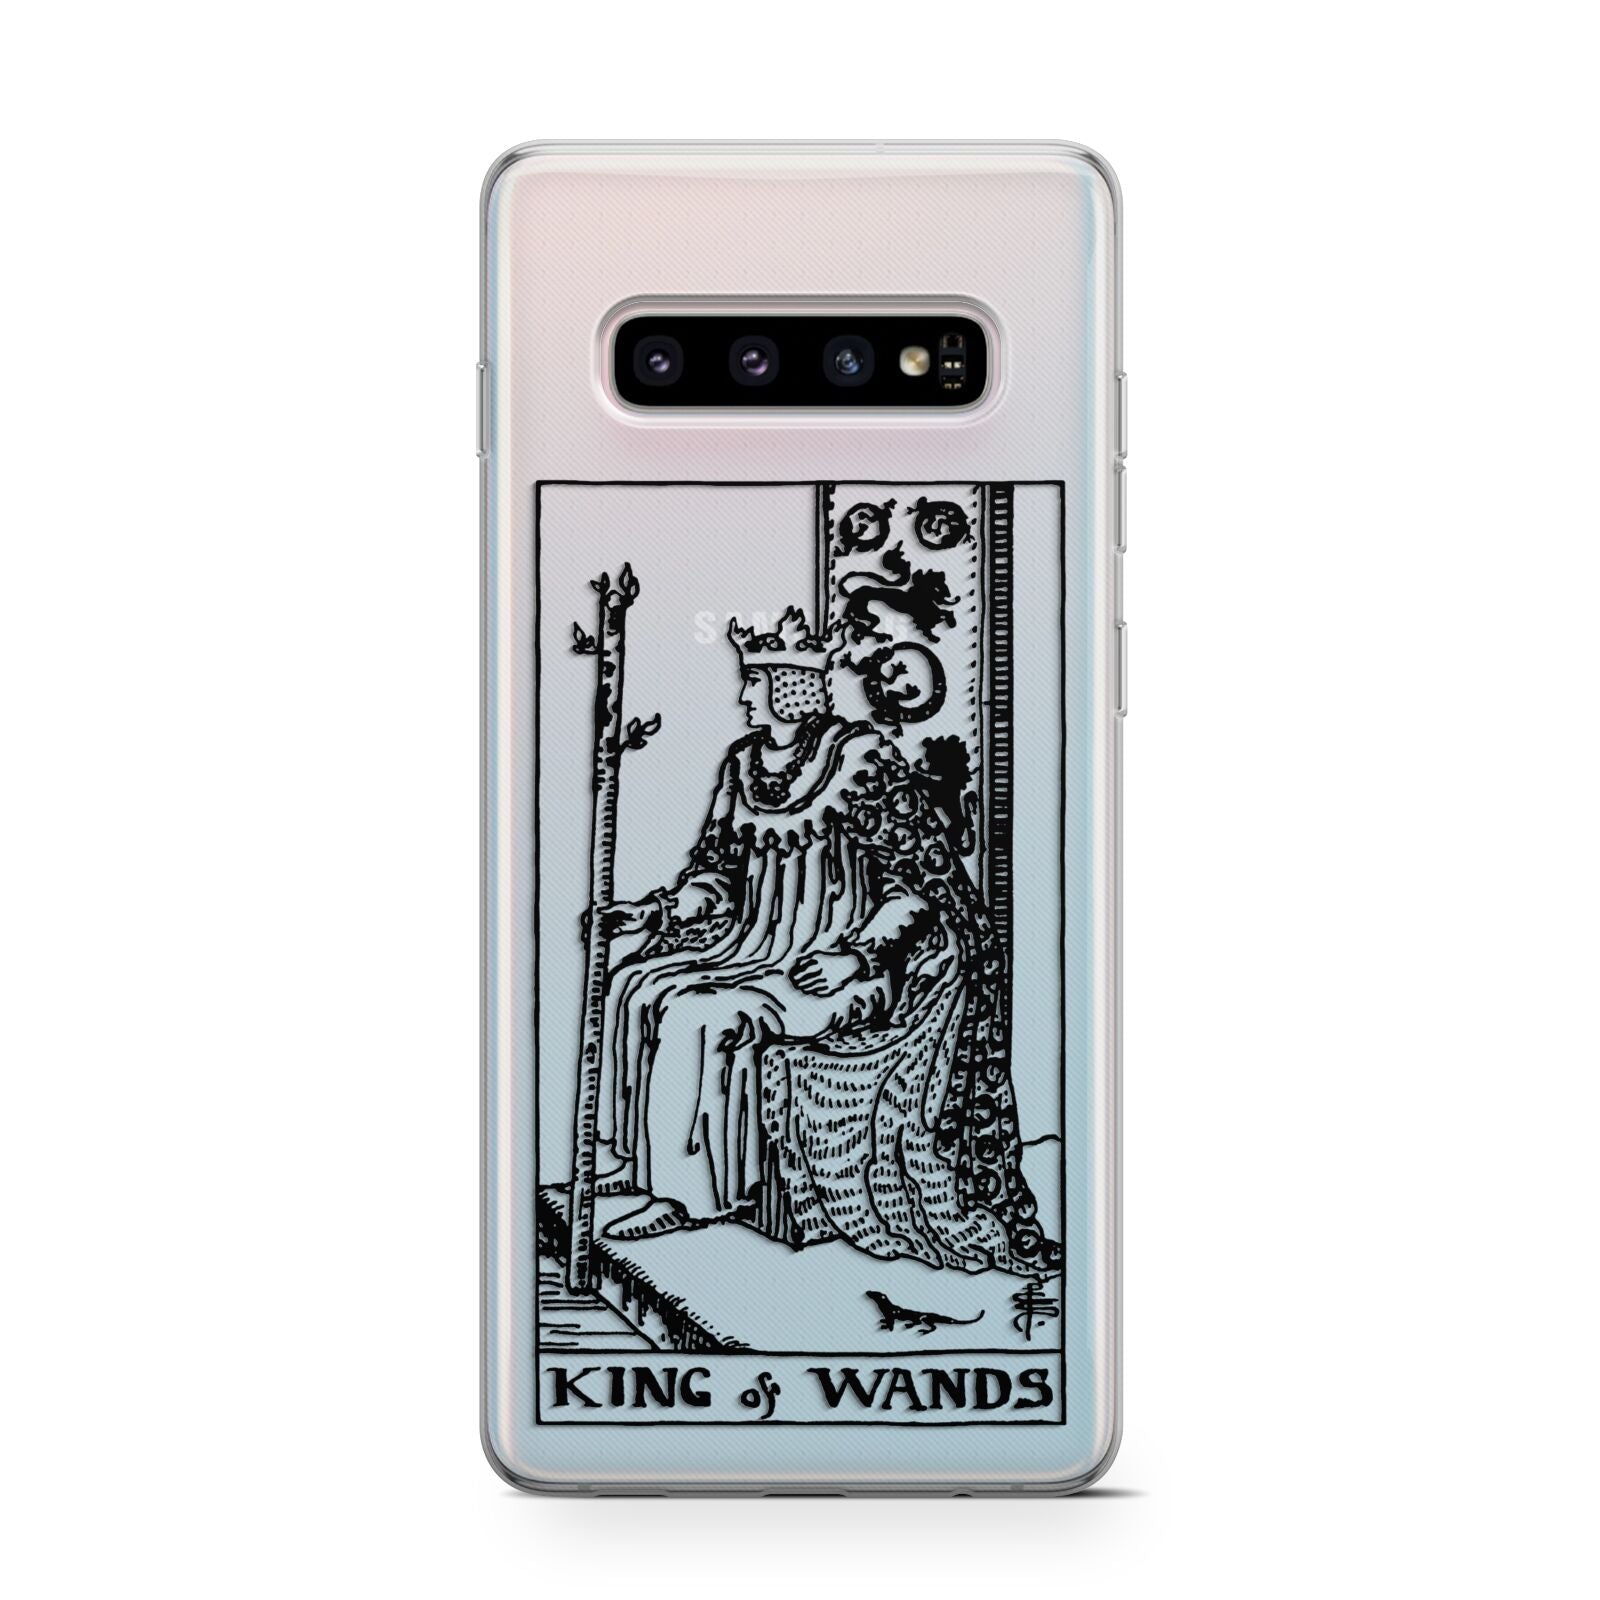 King of Wands Monochrome Samsung Galaxy S10 Case